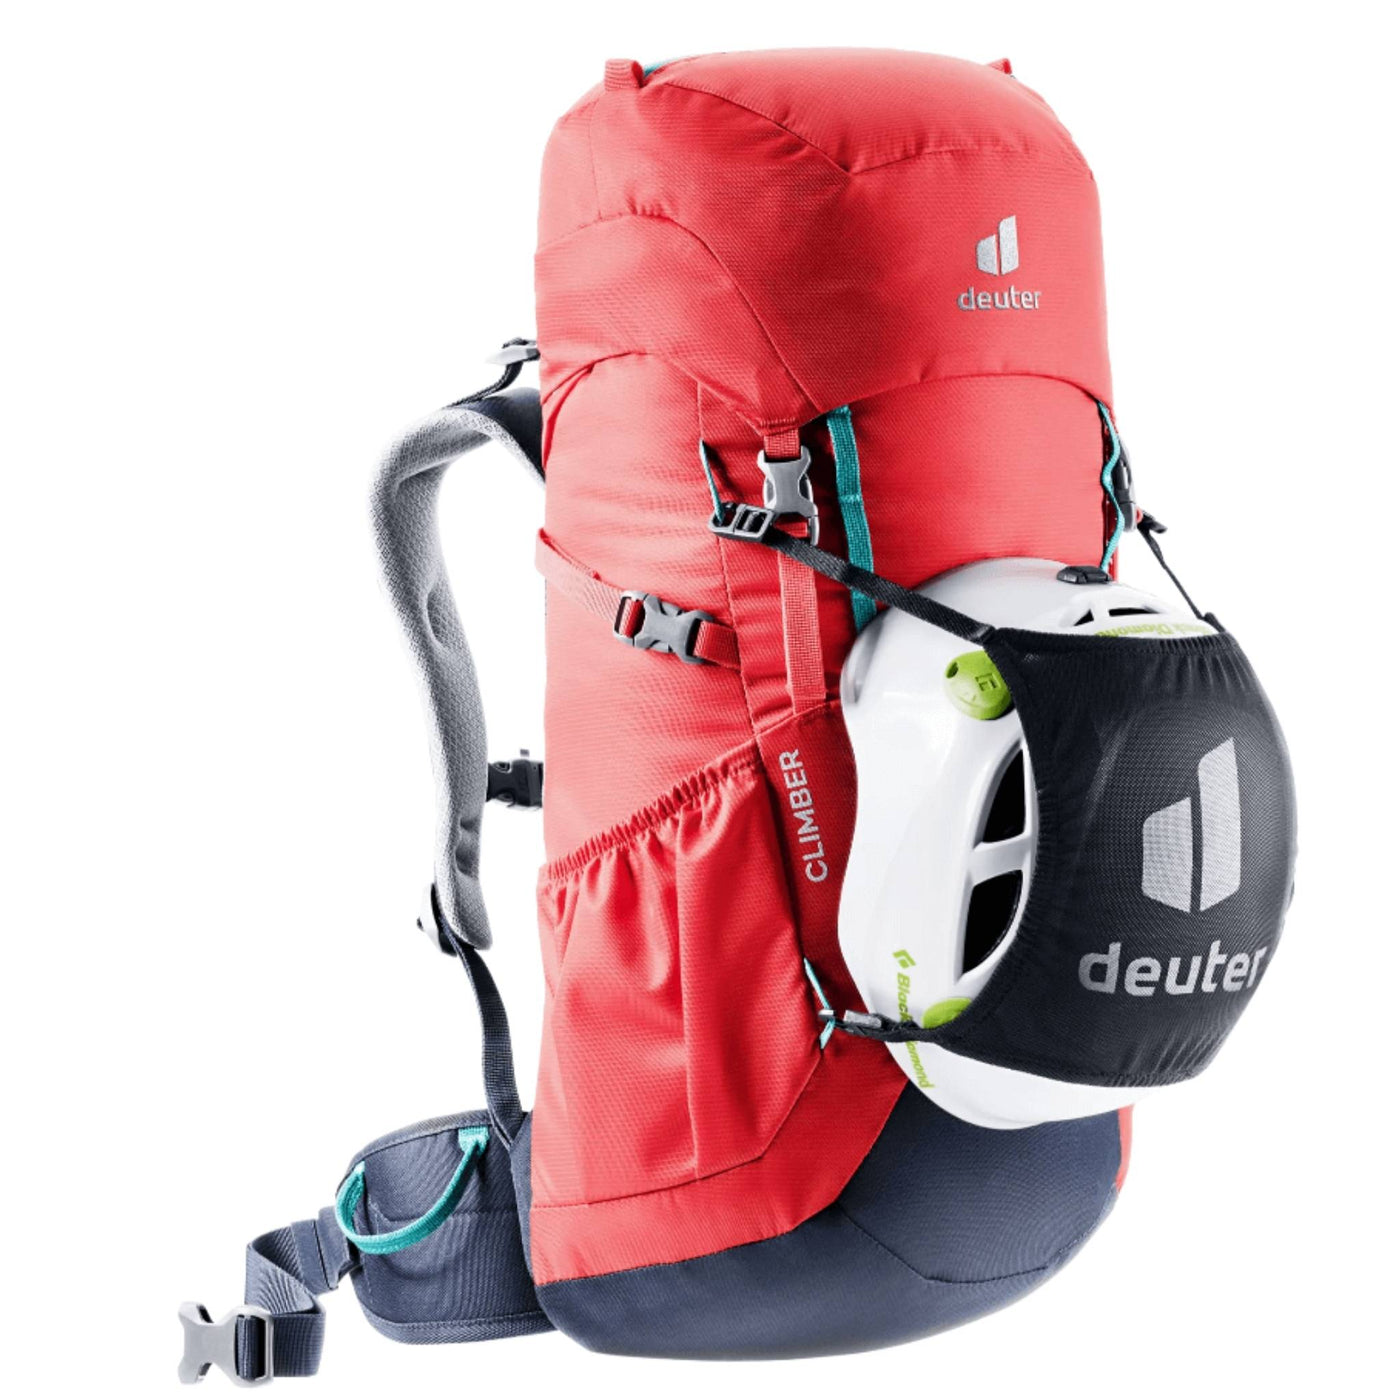 Deuter Climber Kids Backpack | Youth Alpine Backpack NZ | Further Faster Christchurch NZ #chili-navy